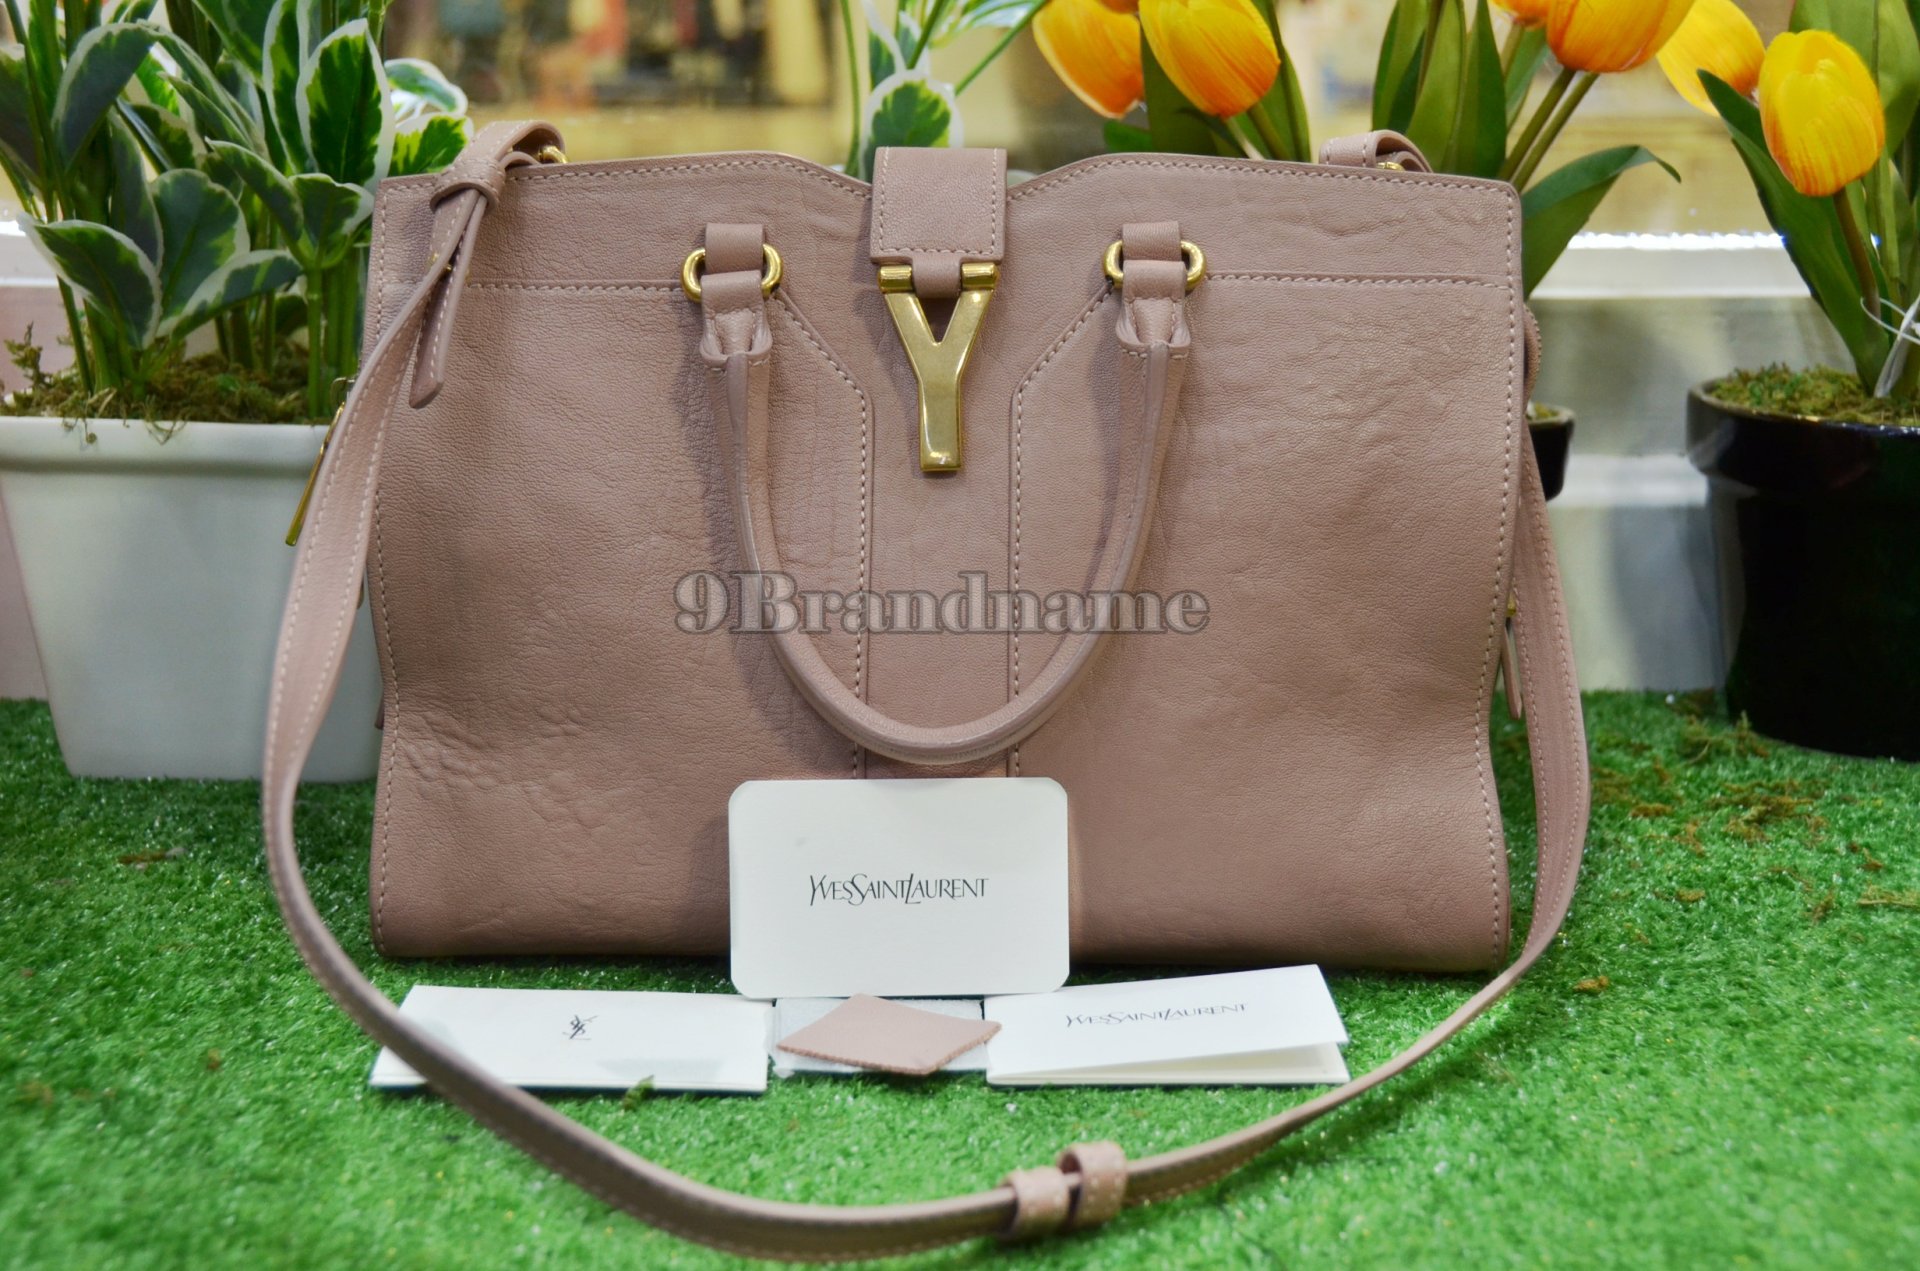 Yves Saint Laurent Small Cabas Chyc Tote